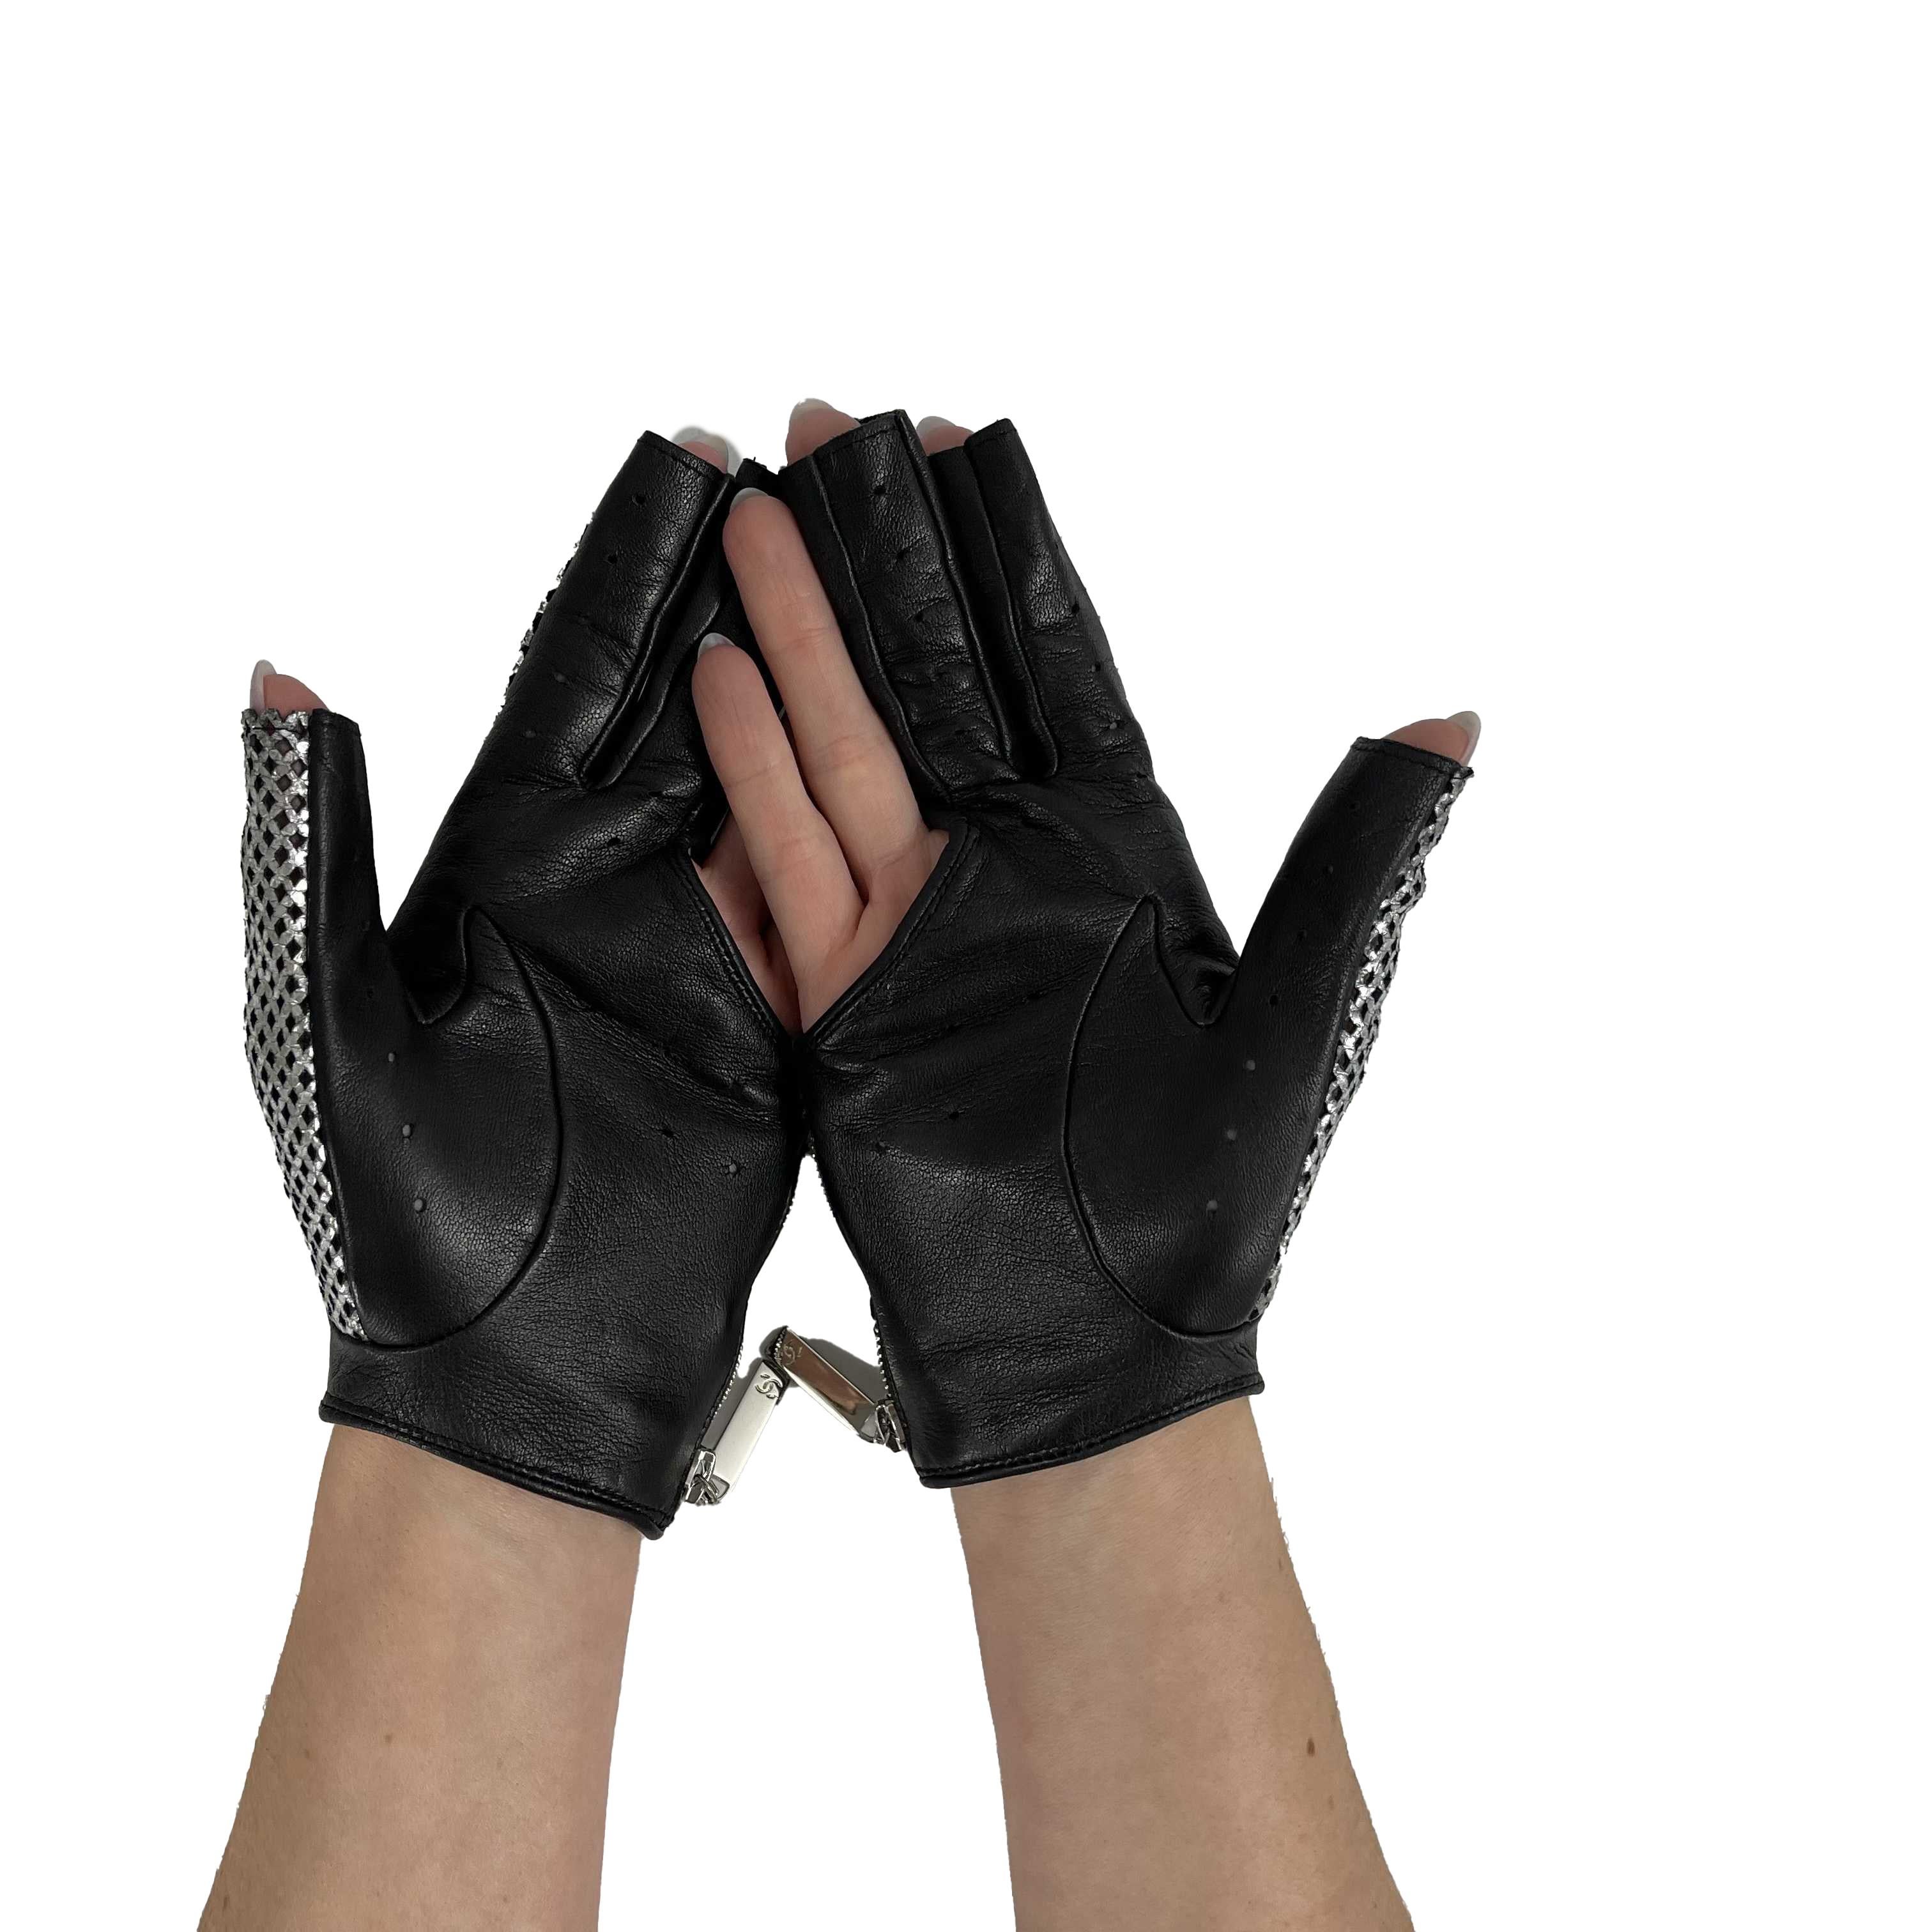 CHANEL 2008 Act 1 Black / Metallic Silver Mesh Leather Gloves 7.5 6